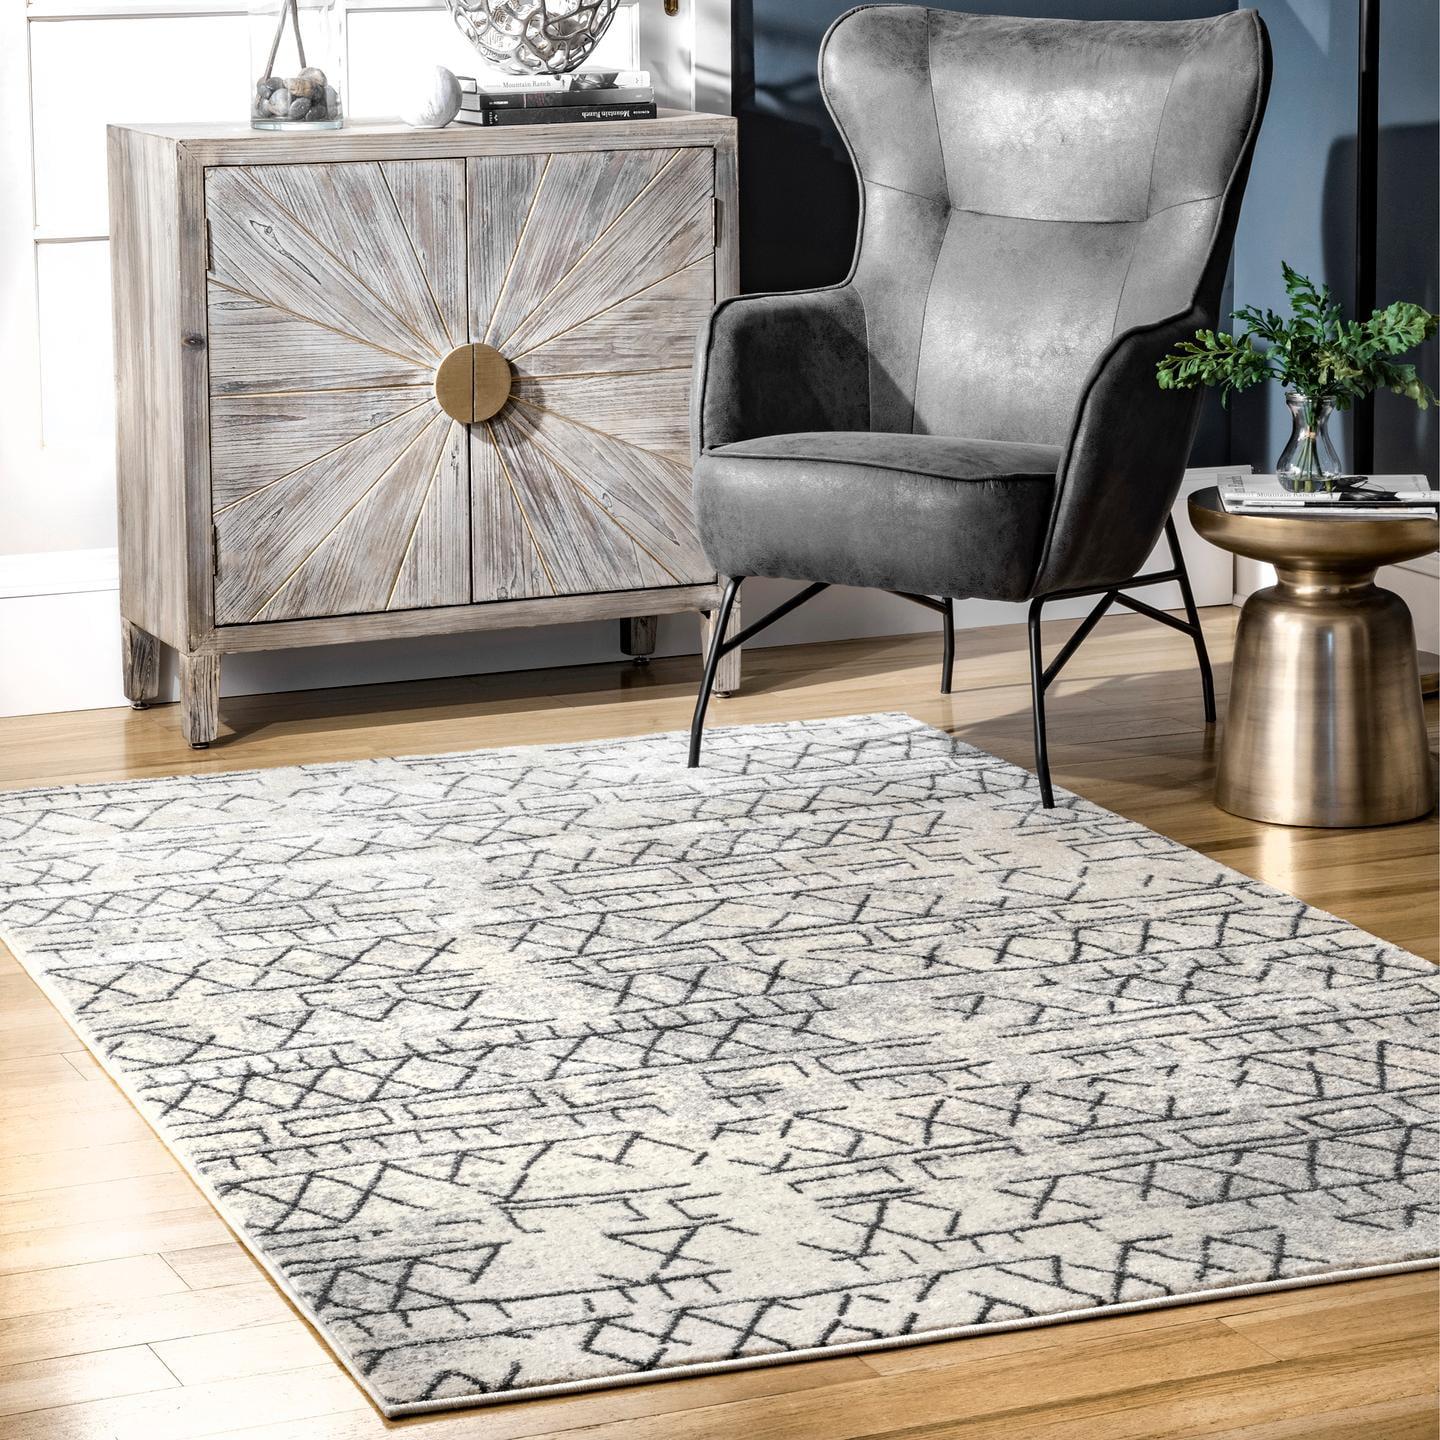 Beige Faded Banded Tribal Rectangular Synthetic Rug 5' x 8'